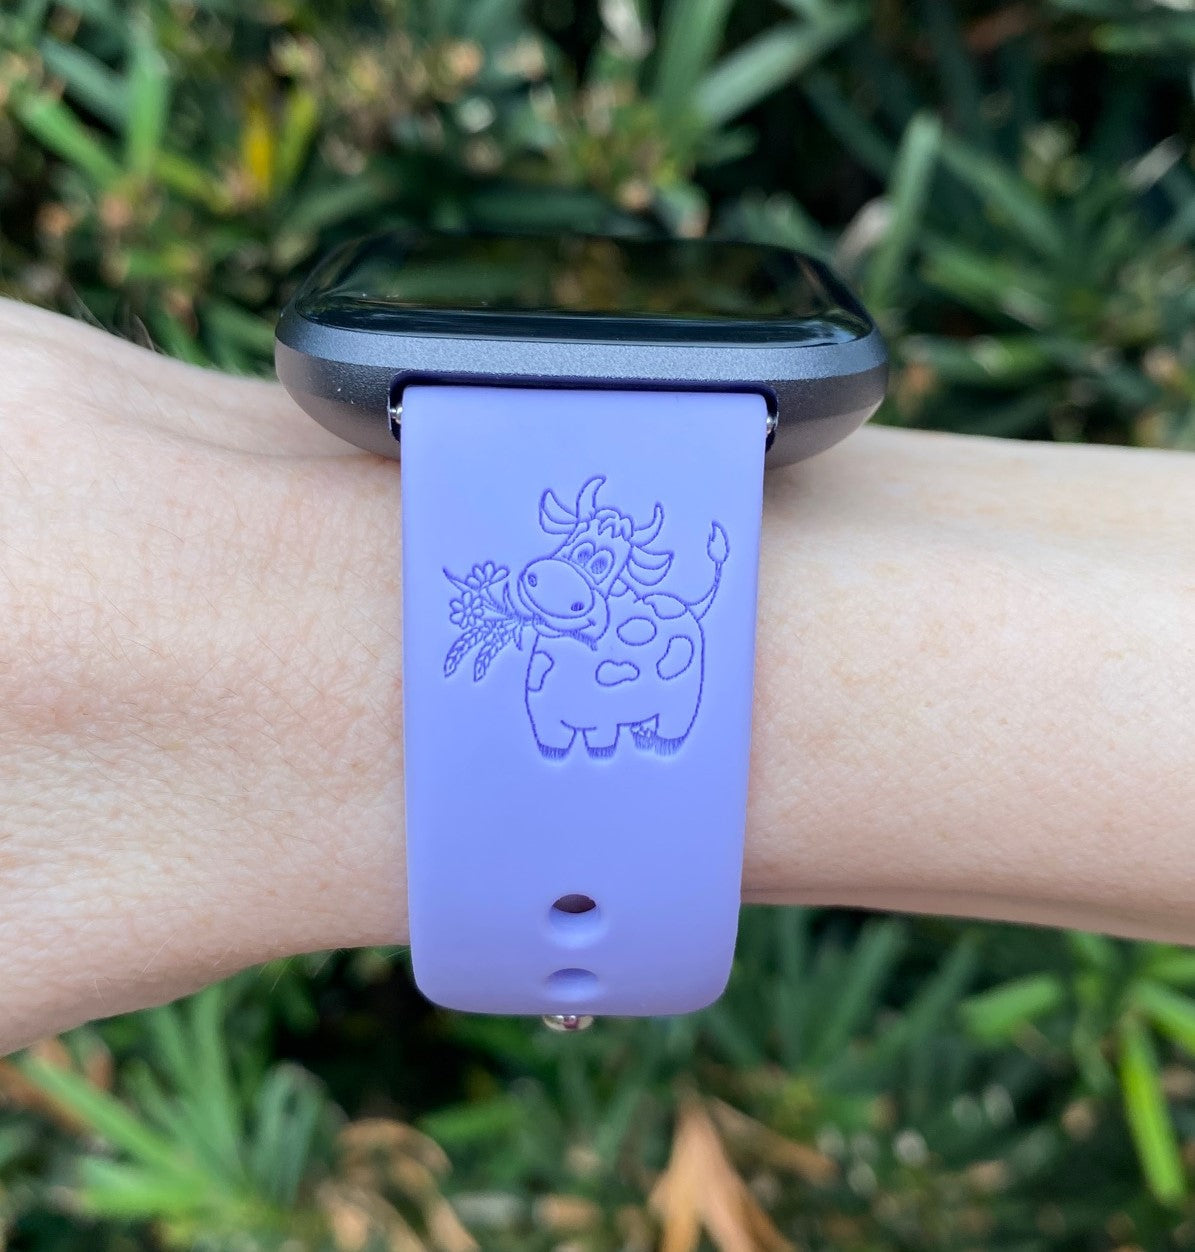 Cow Fitbit Versa 1/2 Watch Band